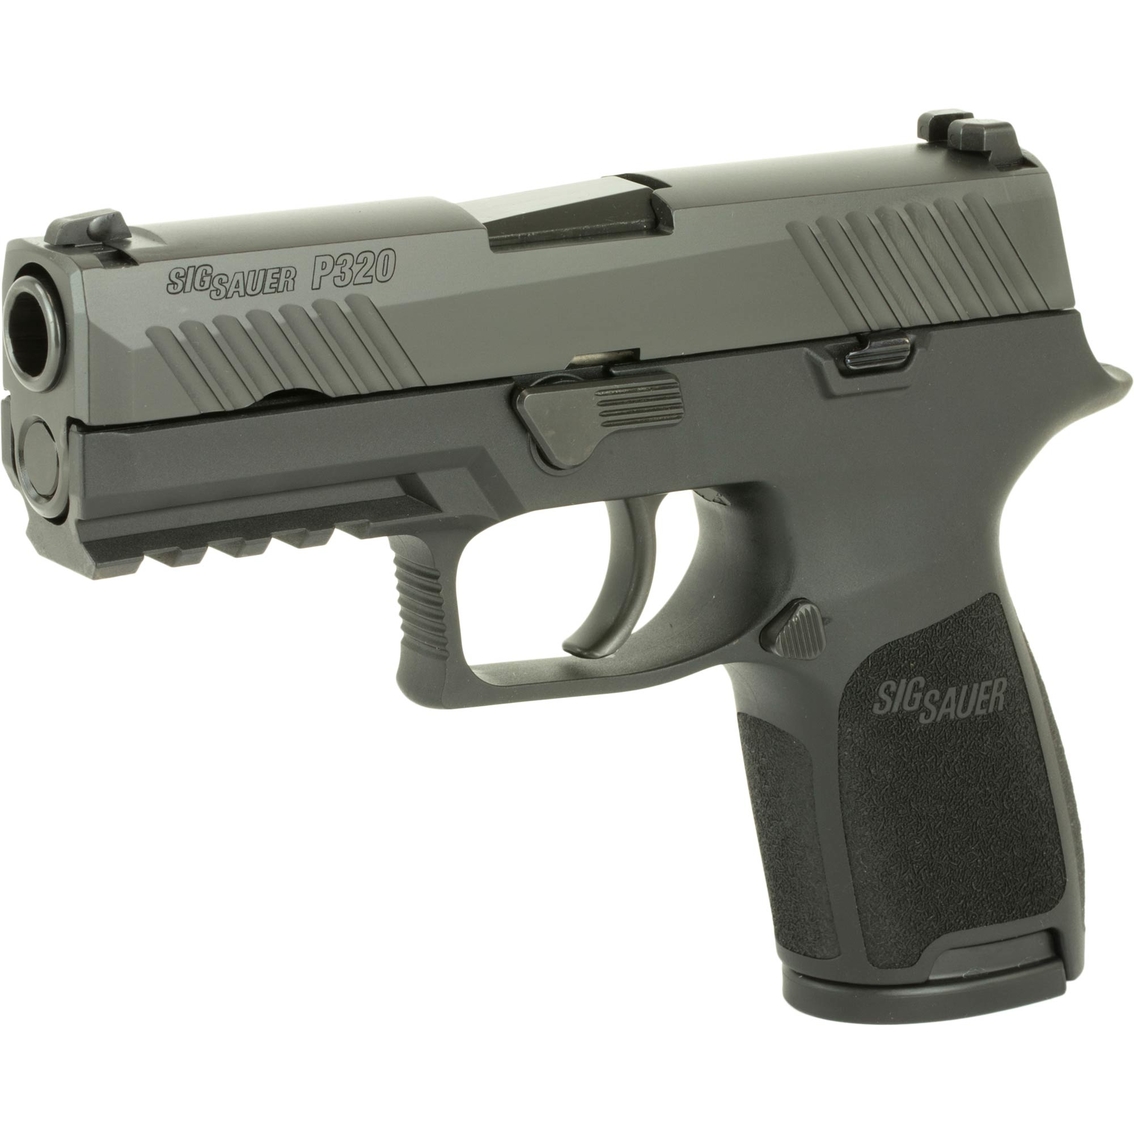 Sig P320 Compact Semi-Automatic Pistol In Stock Now | Don't Miss Out! | tacticalfirearmsandarchery.com